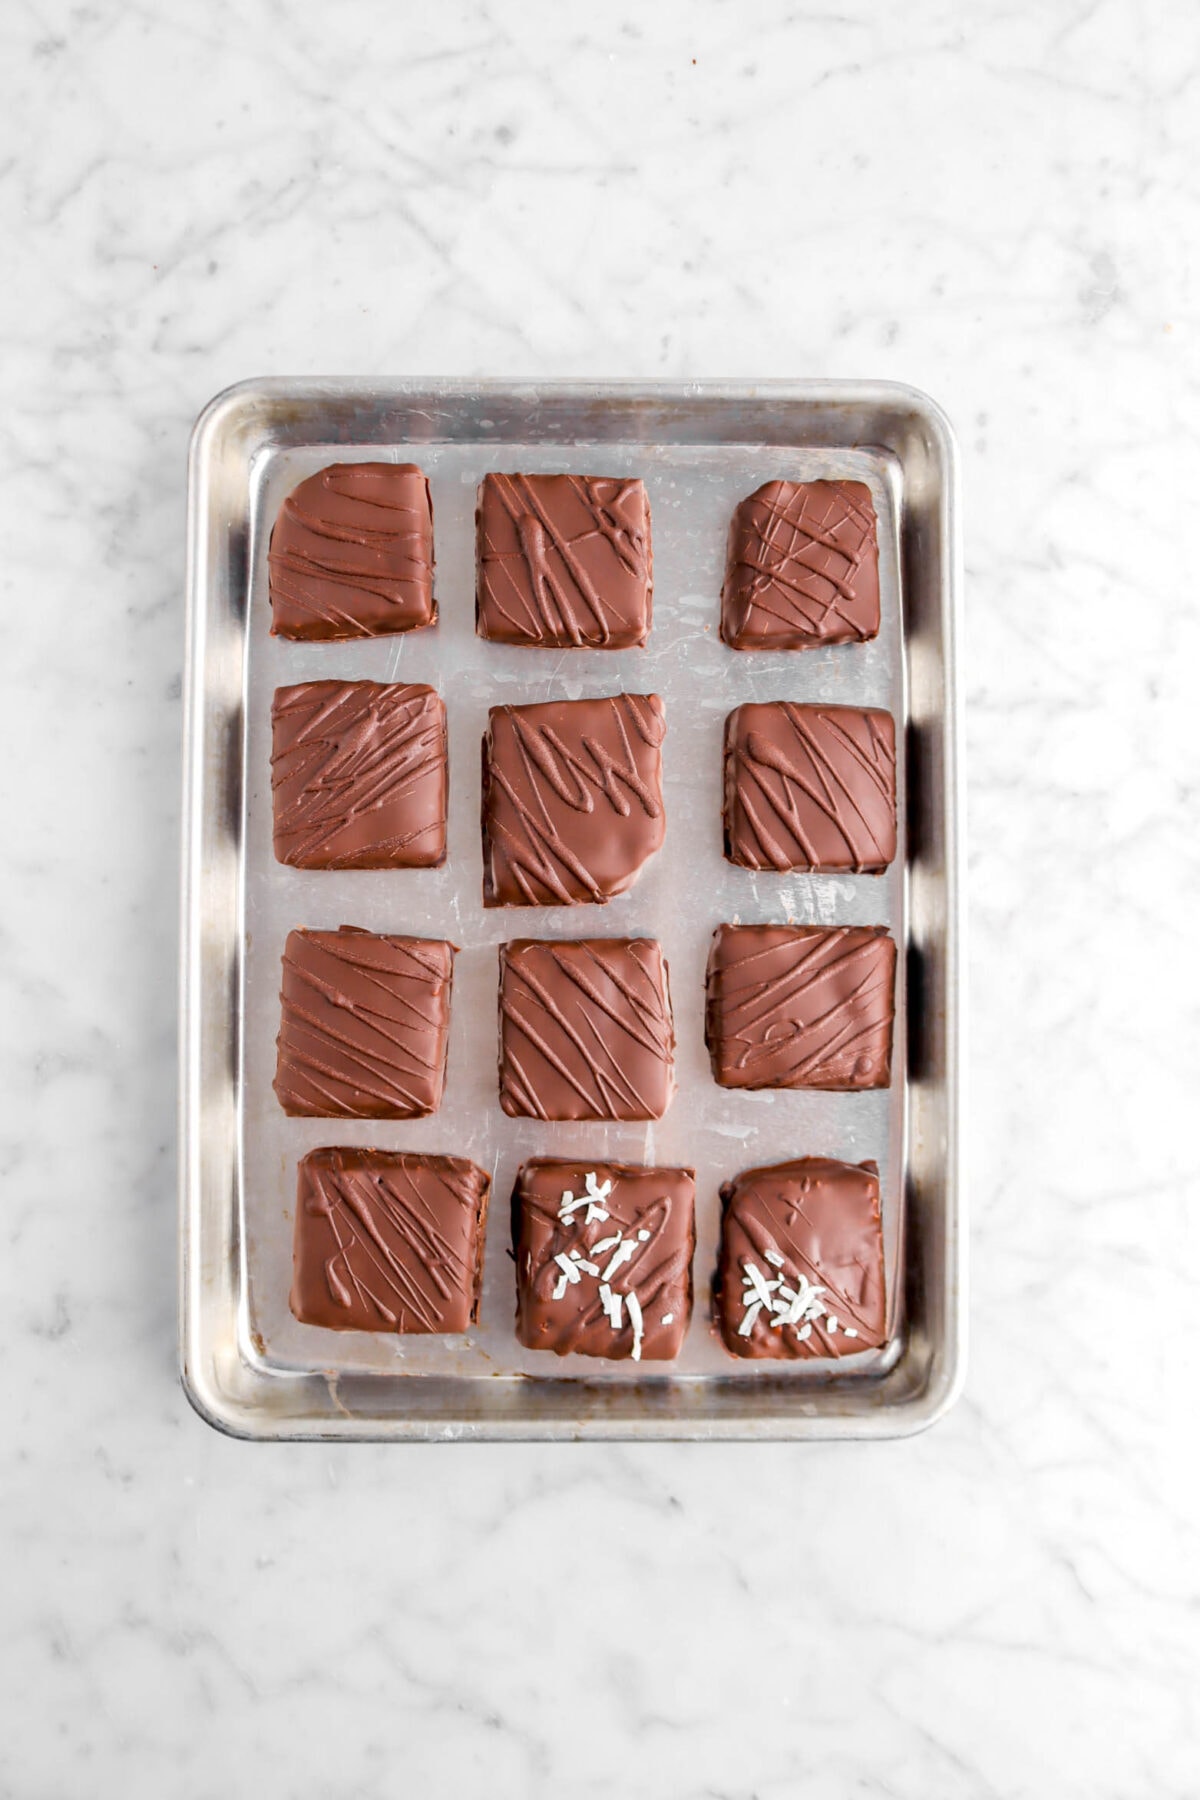 twelve square chocolates on small sheet pan with coconut flakes on two chocolates